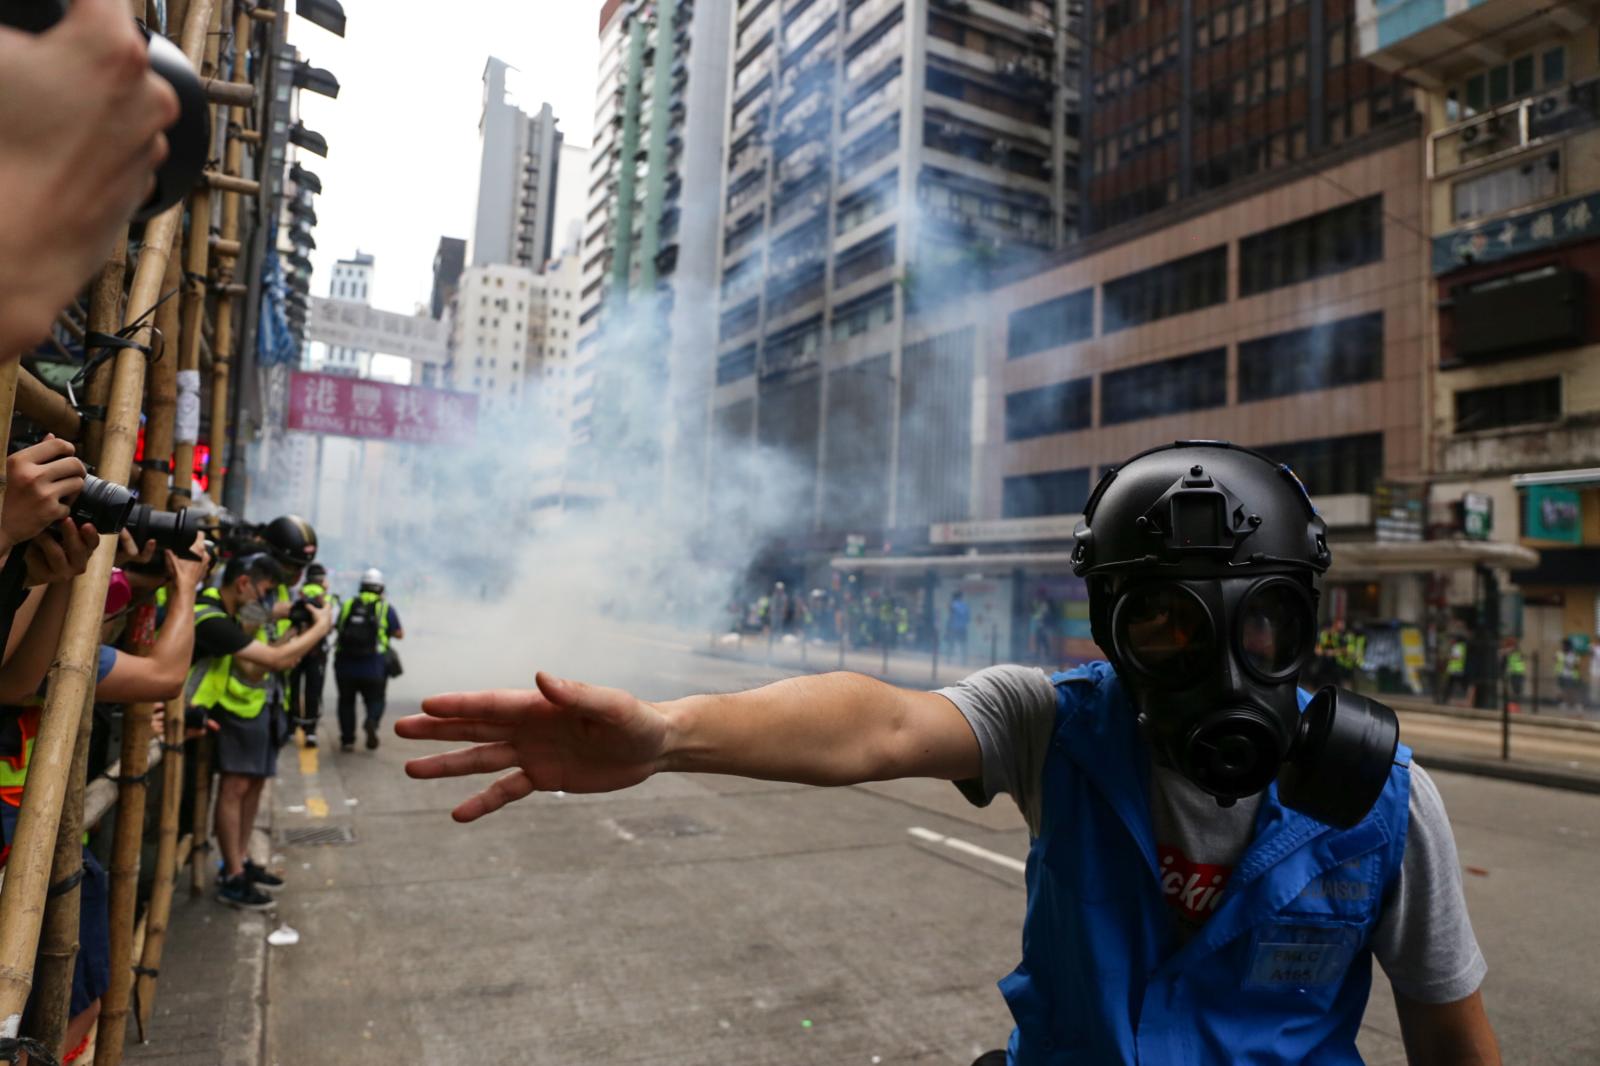 A member of the police media liaison pushes back journalists as tear gas is fired in the background. On the first day of the passing of the National Security Law, protests erupted across Hong Kong. In 2020, the ranking of press freedom in Hong Kong dropped to the 80th place, with increasing pressure and constrictions on media.